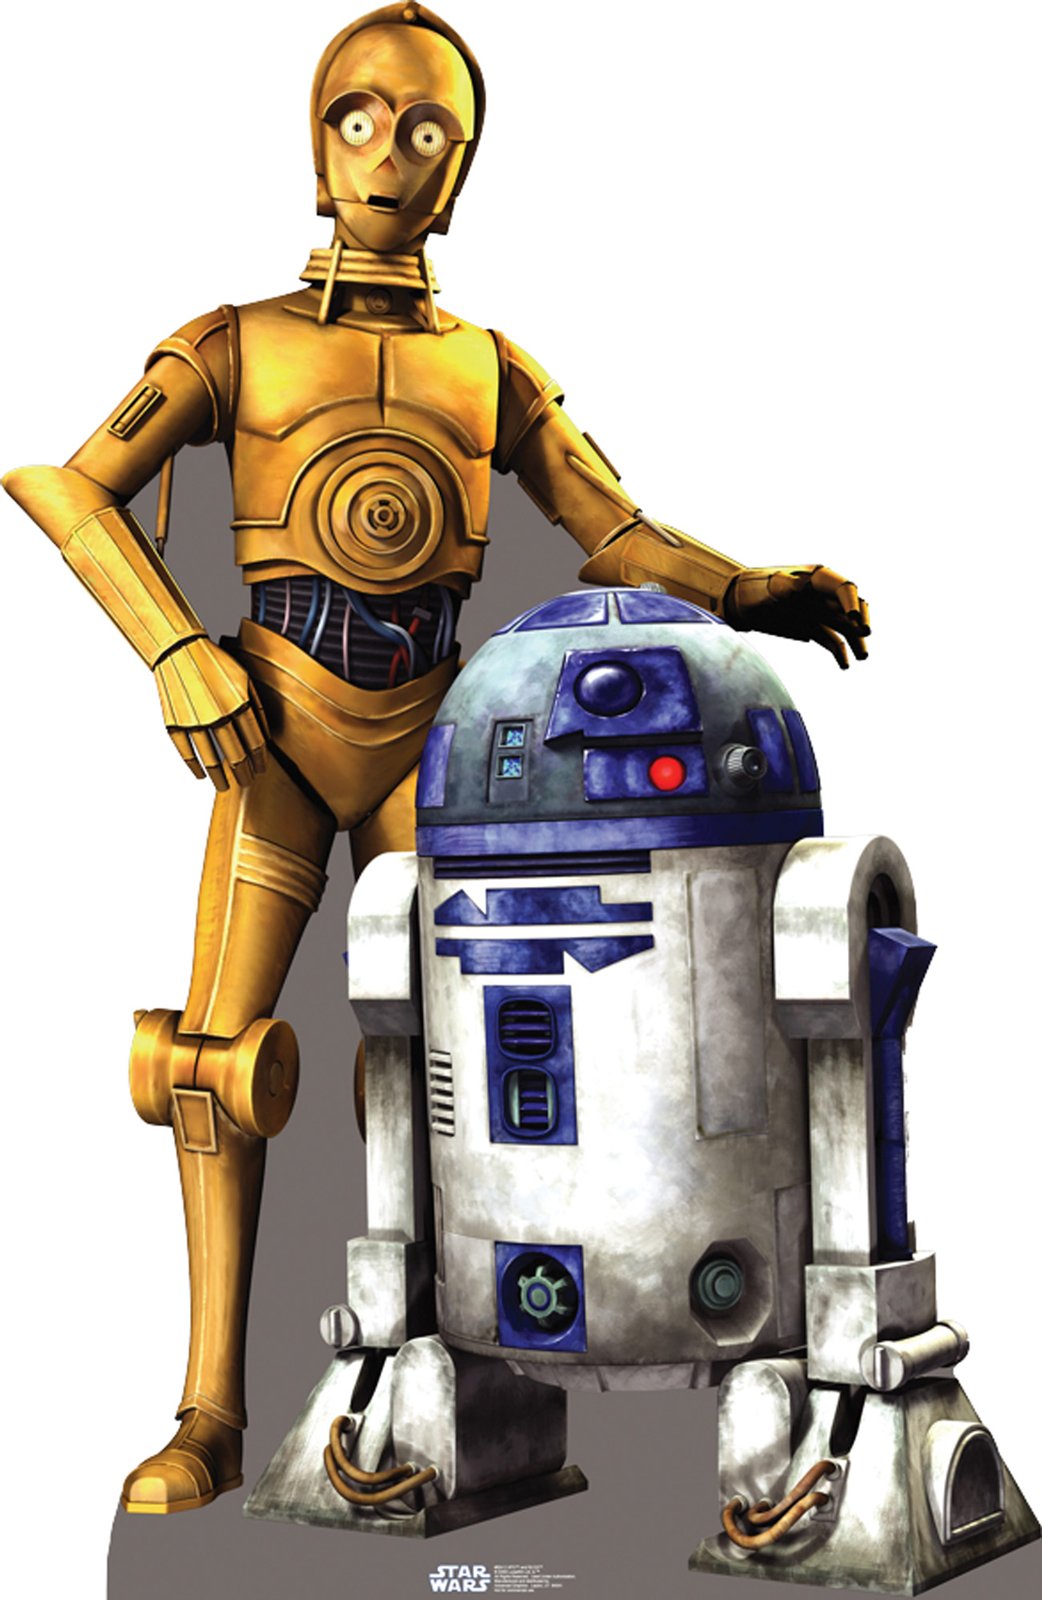 Wallpaper Star Wars C3po And R2d2 Photos Of Epic iPhone